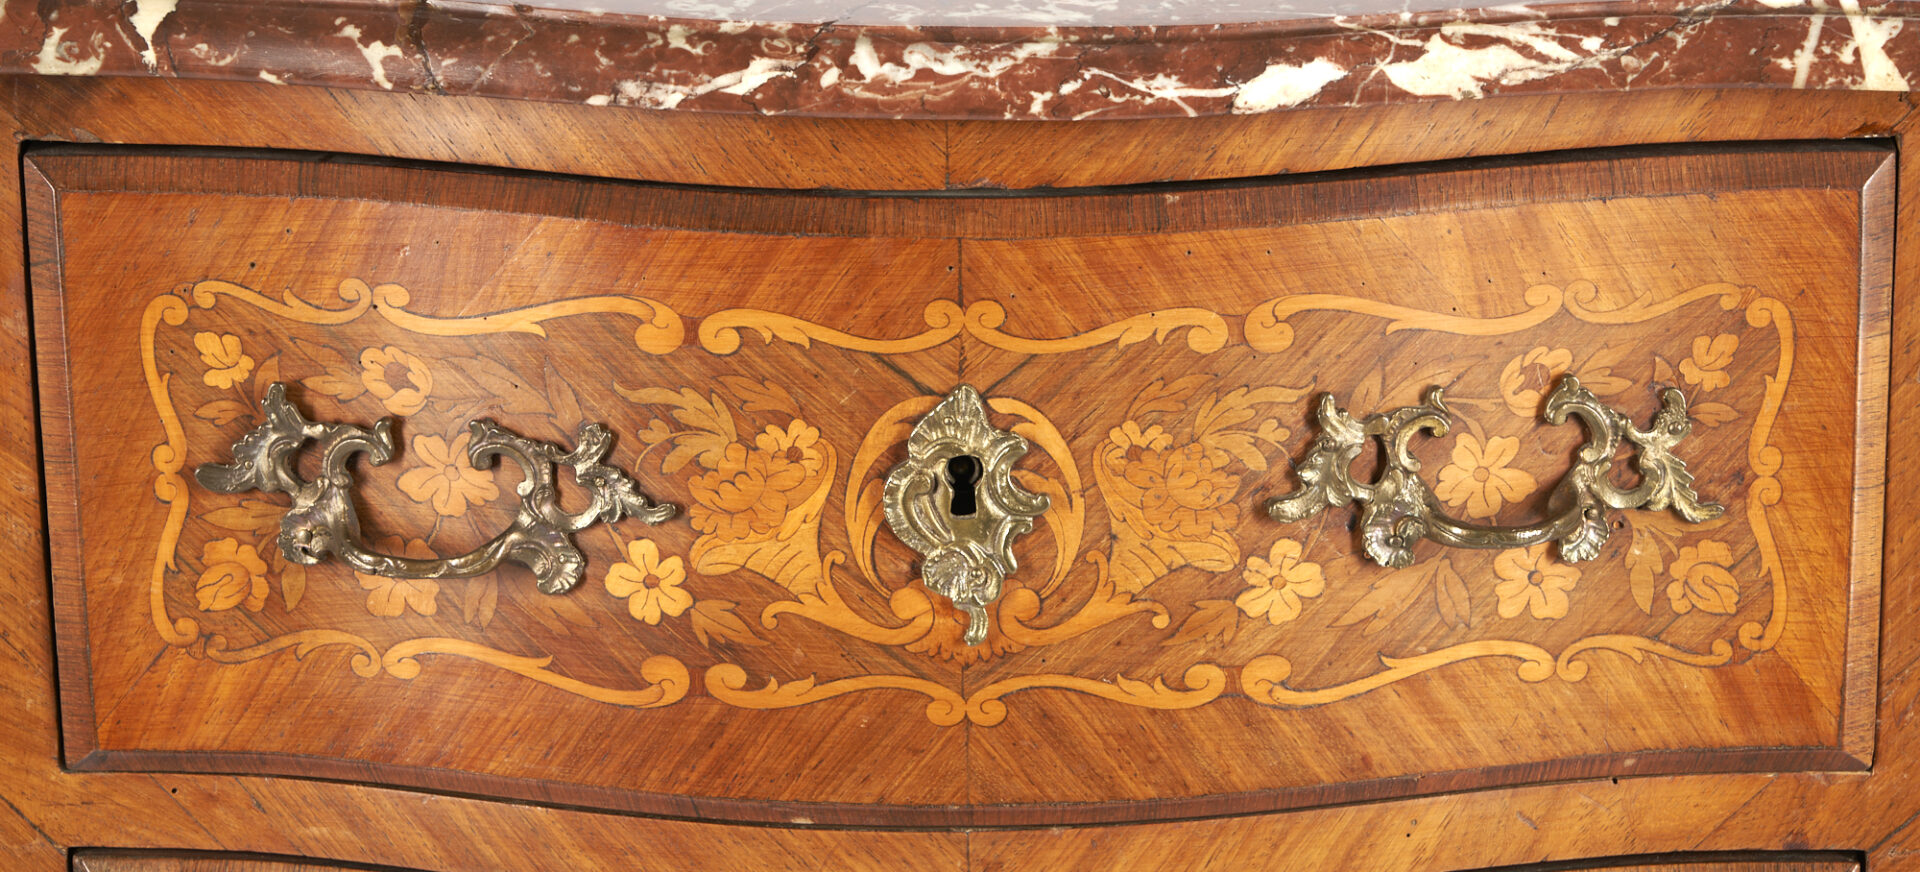 Lot 351: Diminutive Louis XV Style Marble Top Commode